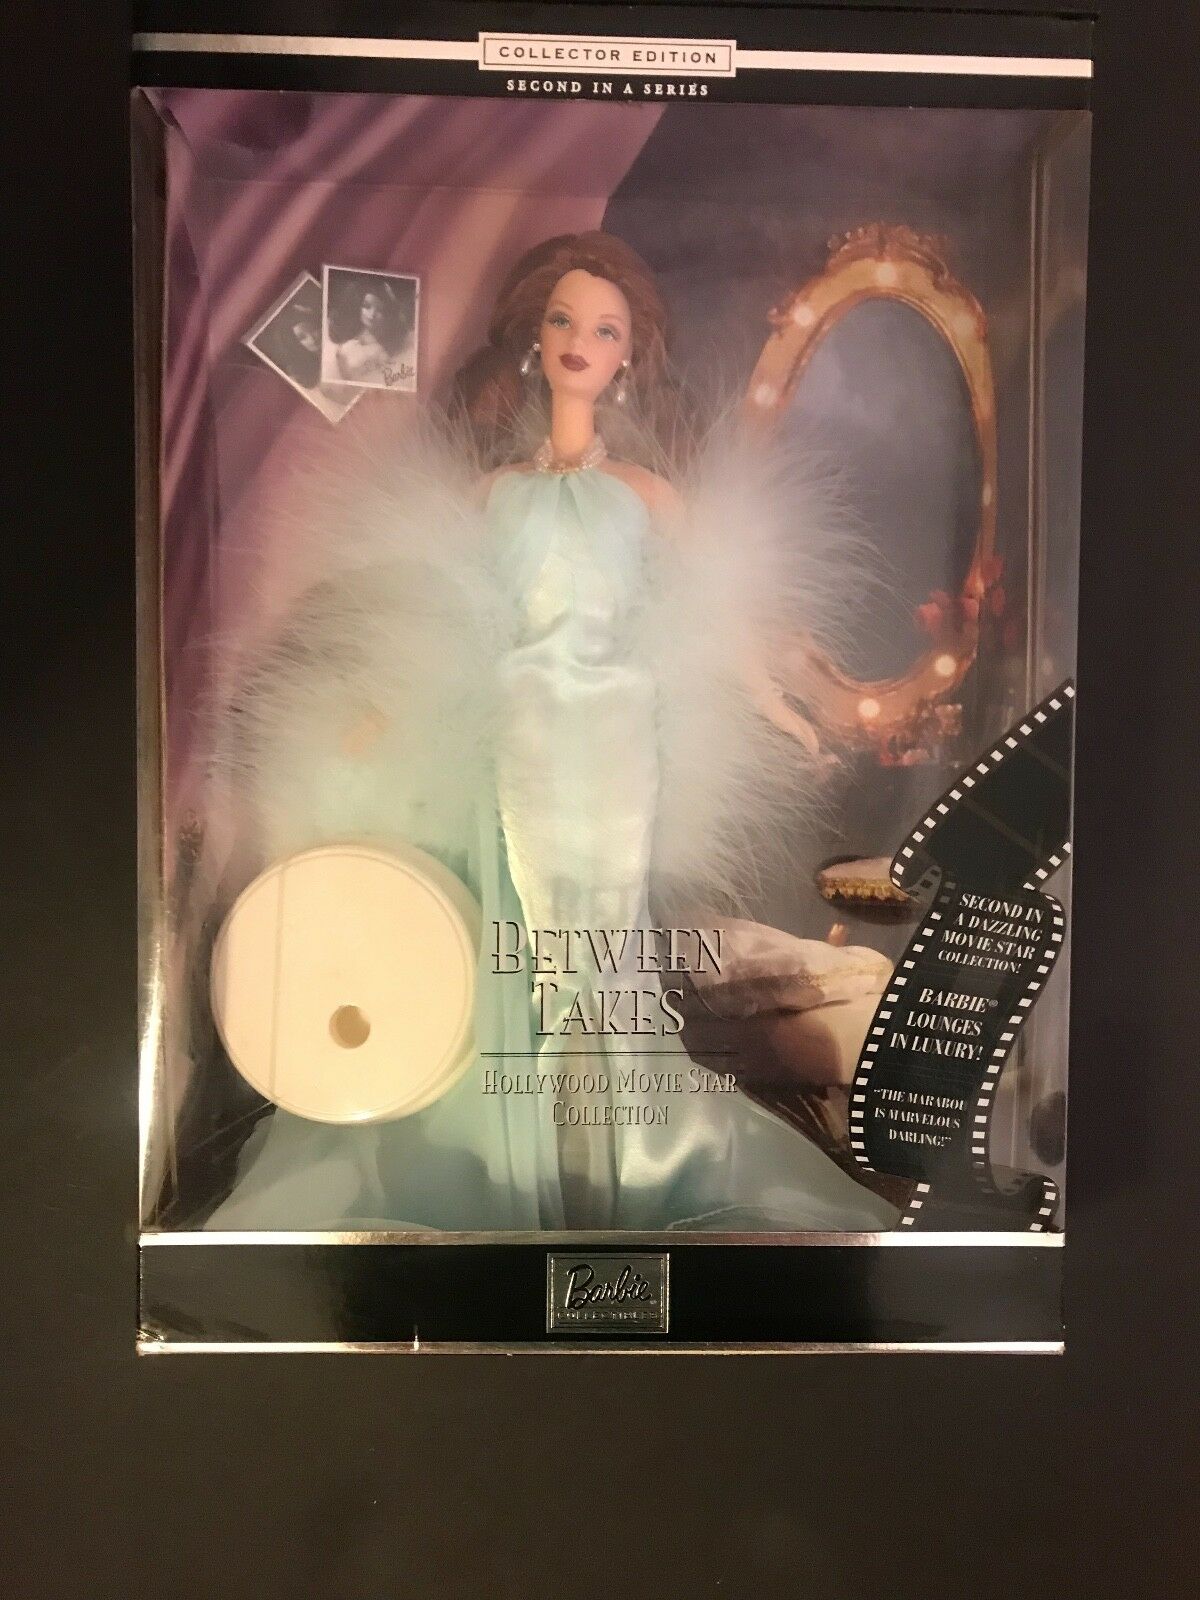 Wow! Between Takes 2000 Barbie Doll Hollywood Movie Star Collection